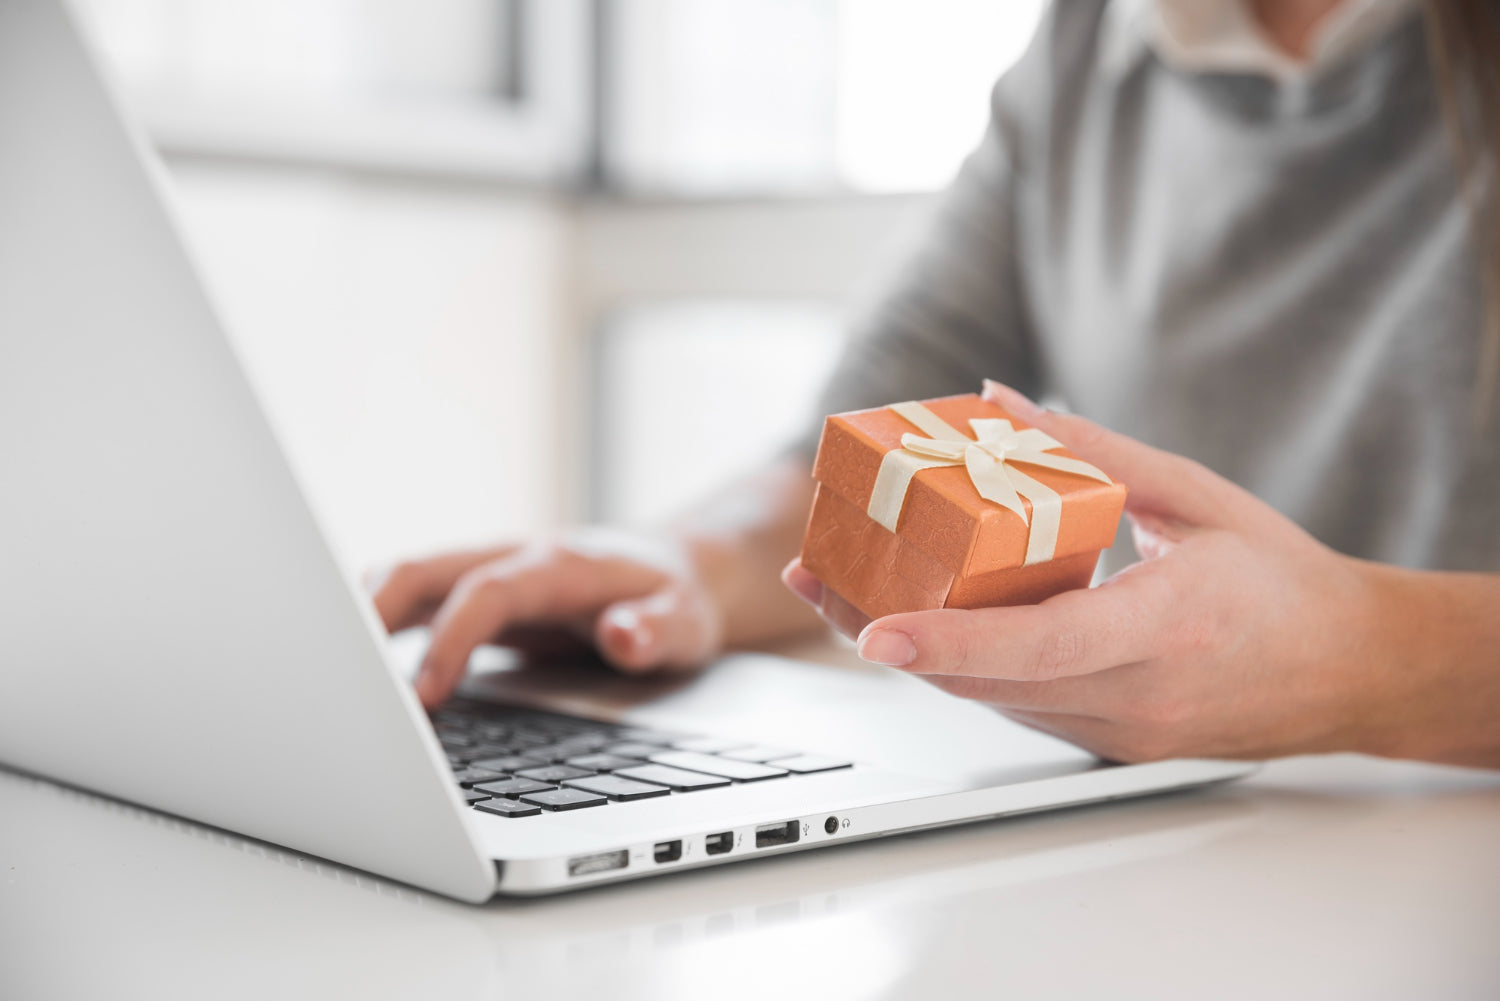 7 Tips for Shopping on Cyber Monday